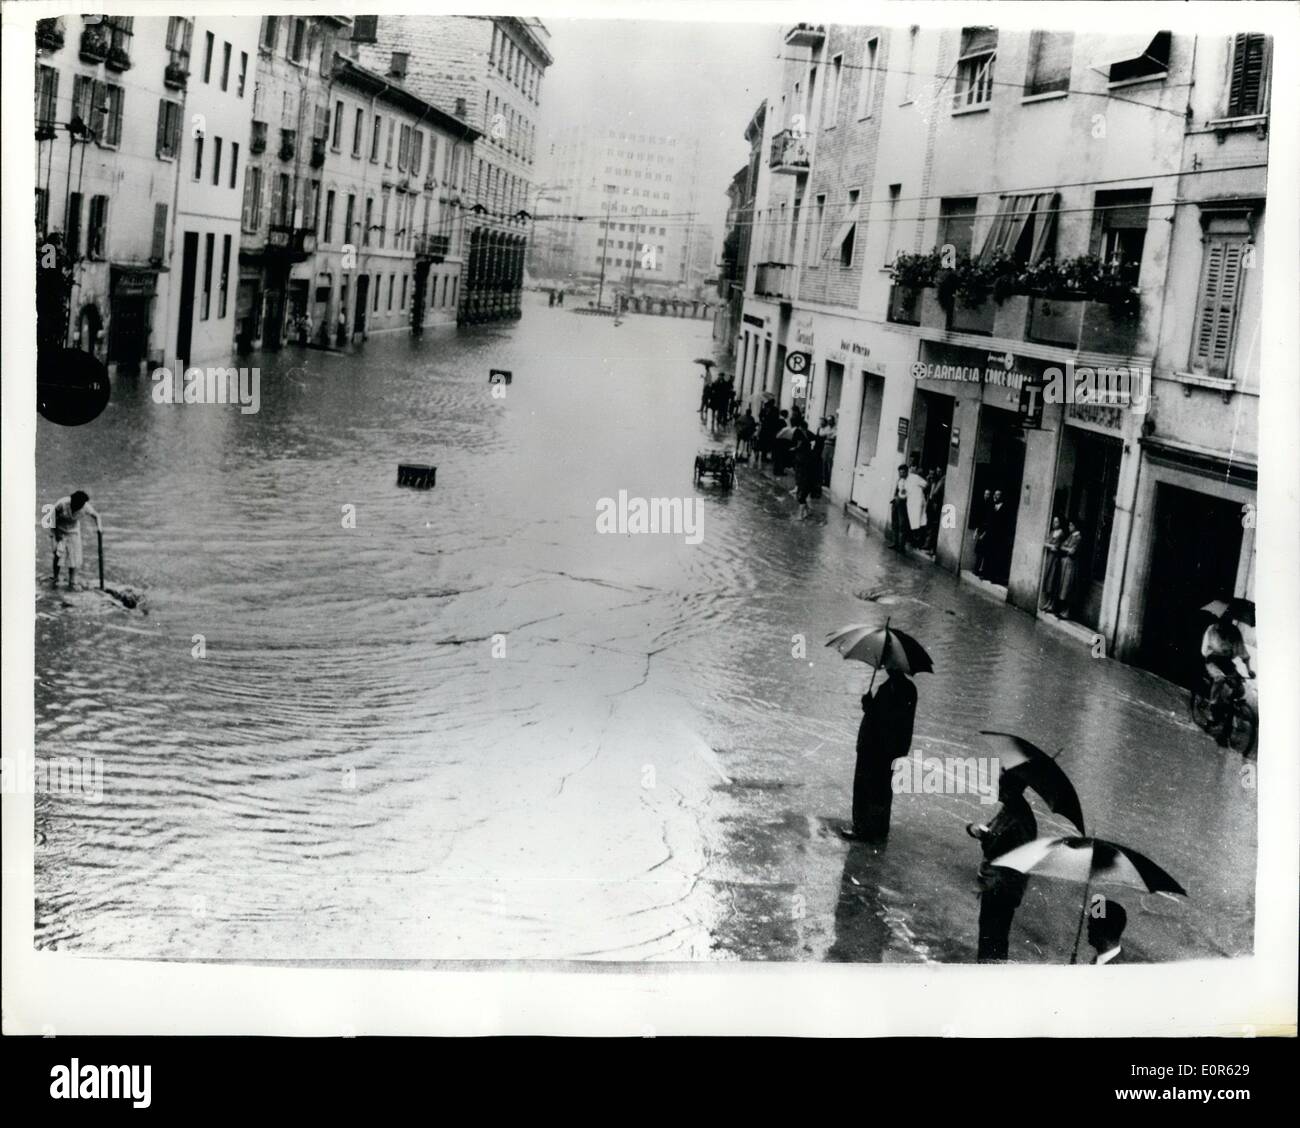 Jun. 06, 1958 - Violent Cloudbursts Cause Widespread Floods In Italy.. Main Street of Brescia - Under Water Many parts of Italy Stock Photo